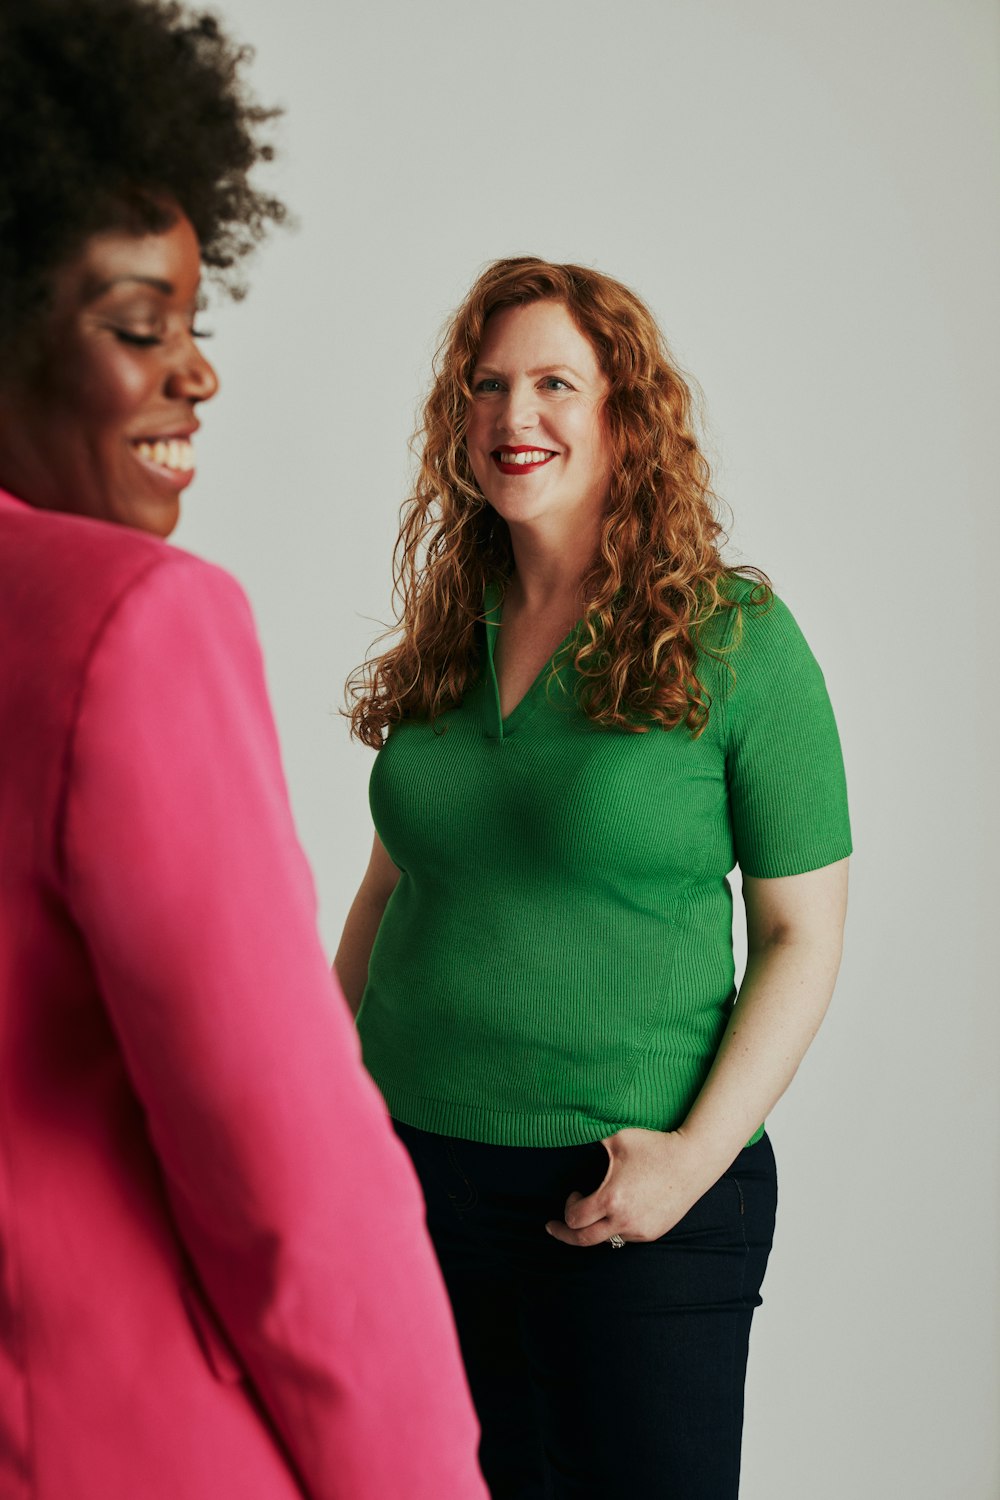 a woman standing next to another woman in a green shirt